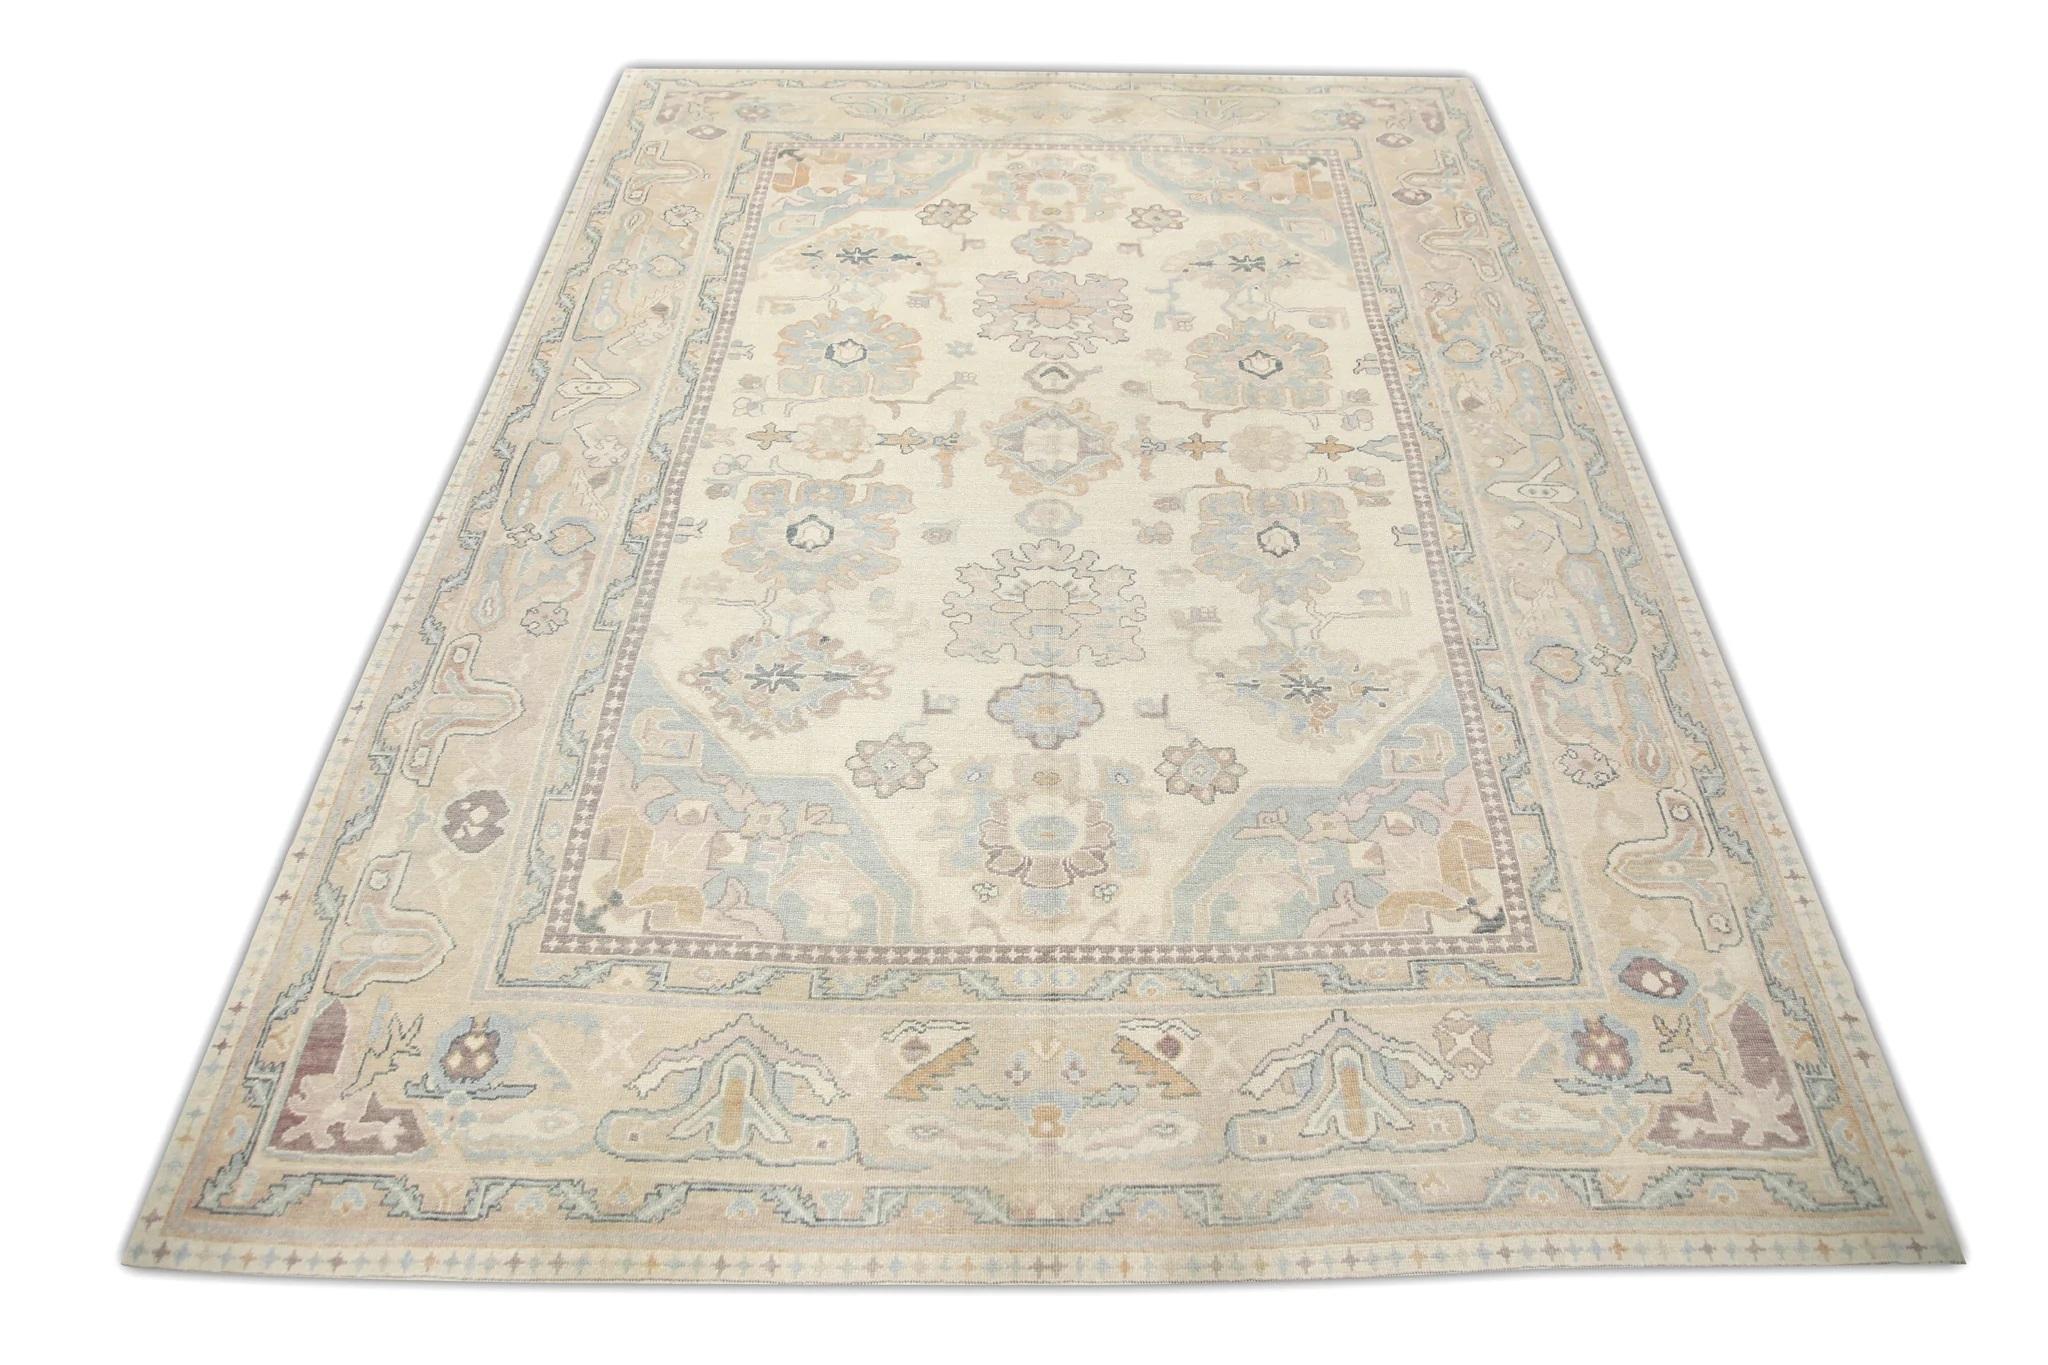 Contemporary Tan Multicolor Floral Handwoven Wool Oversized Turkish Oushak Rug 11' x 15'3